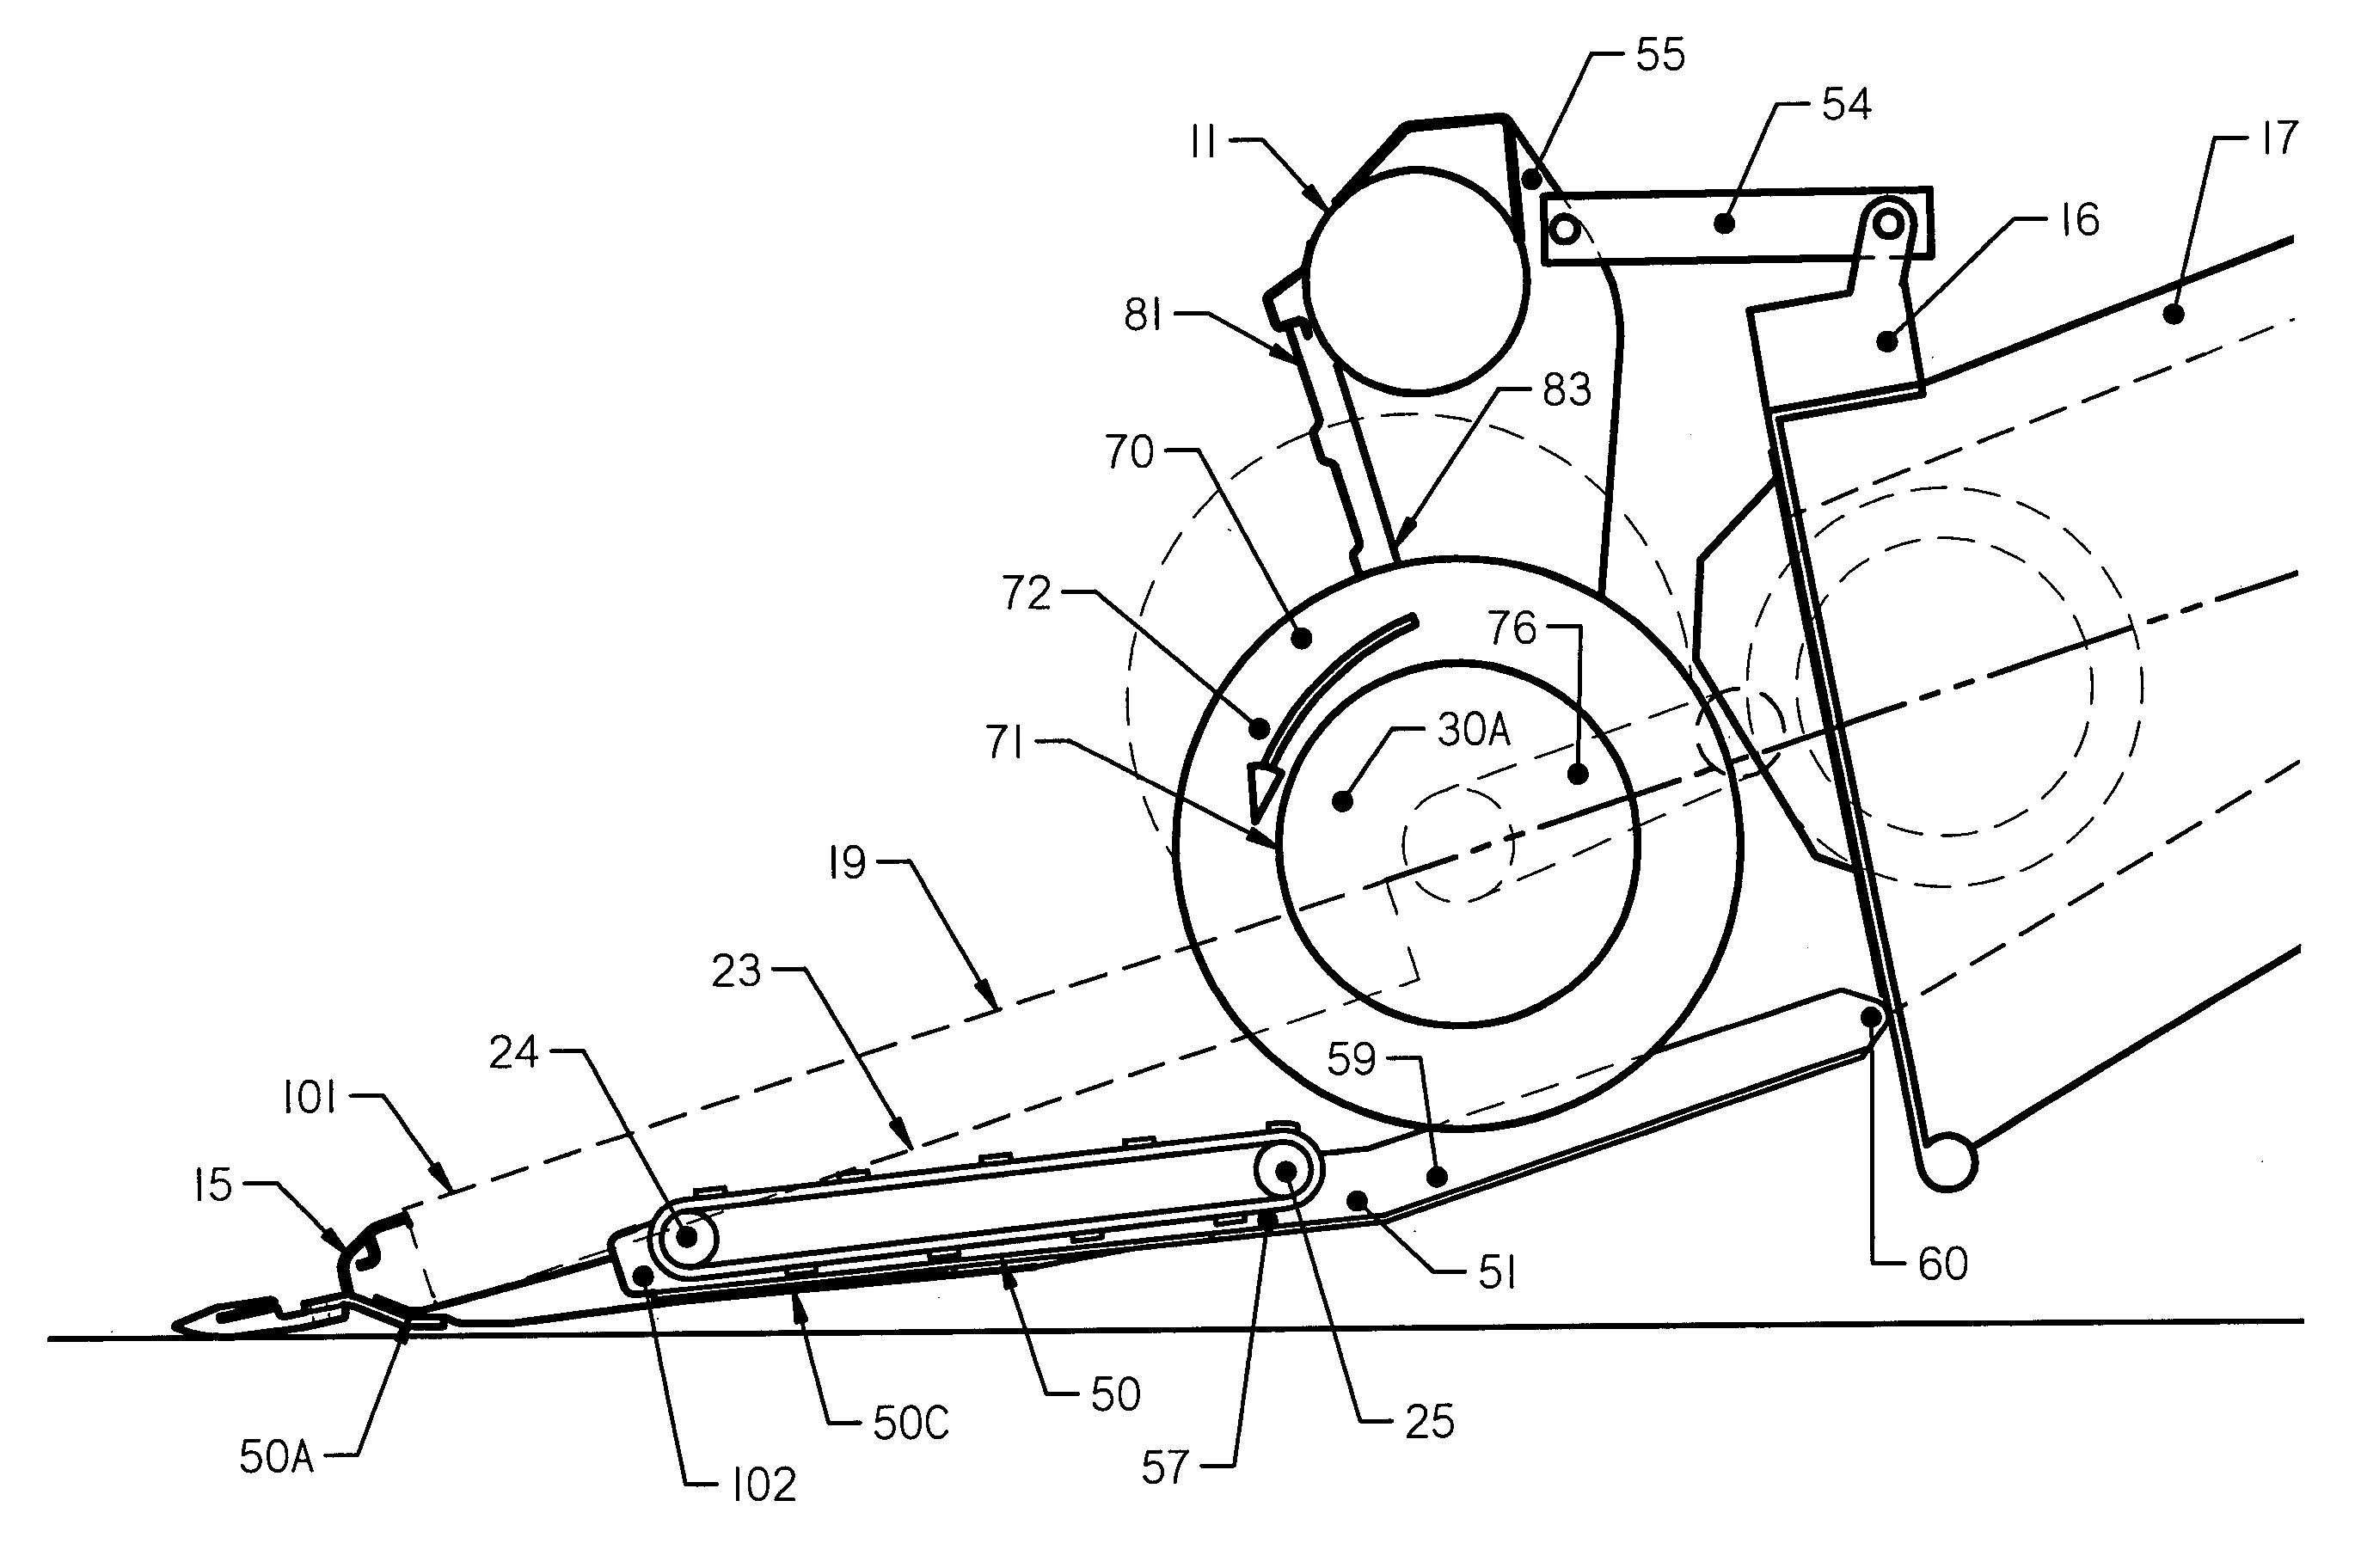 Crop feed arrangement for the header of a combine harvester